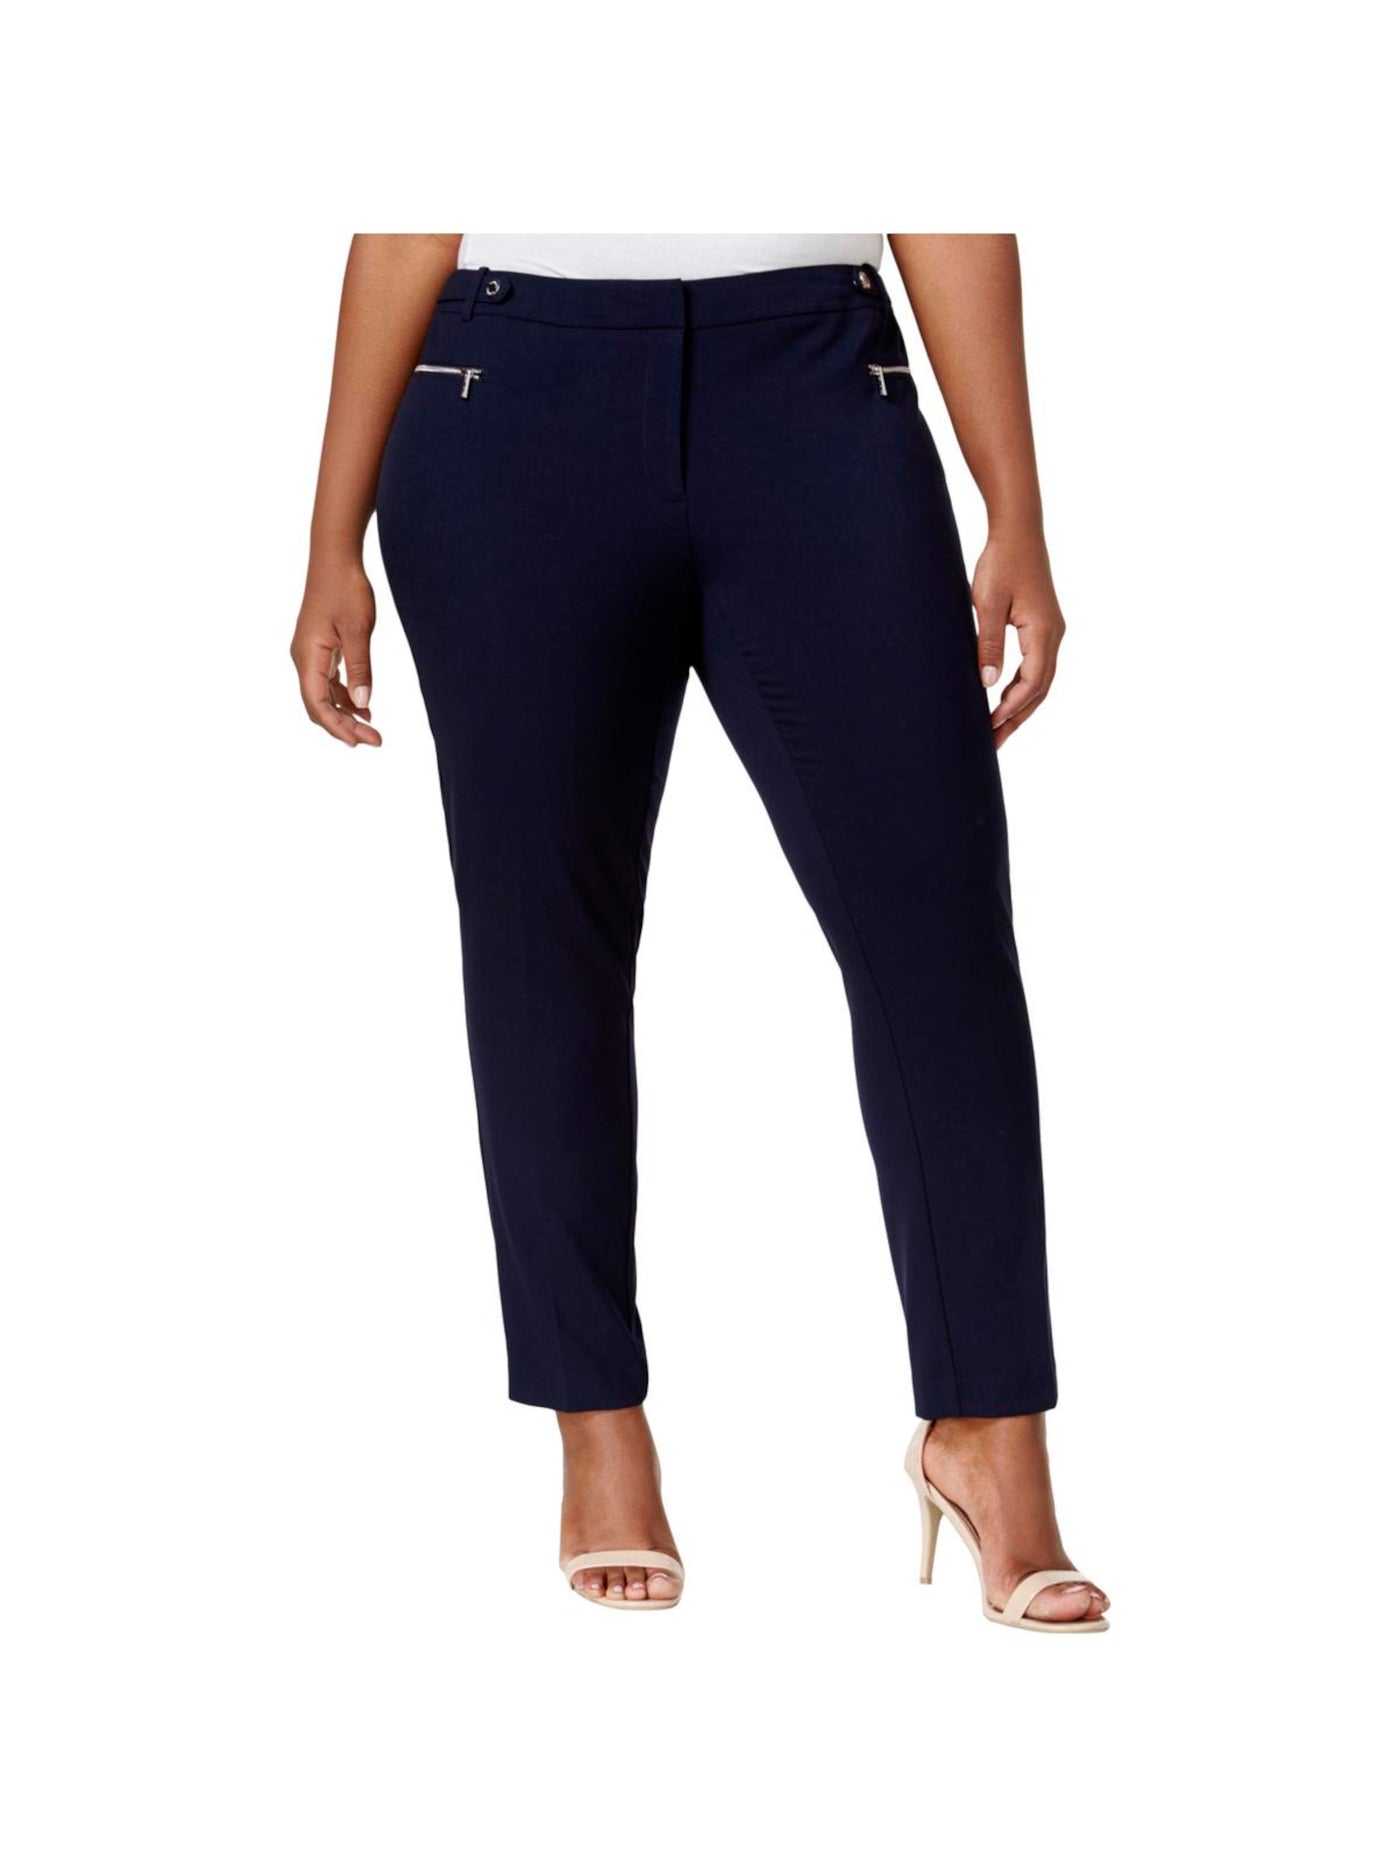 CALVIN KLEIN Womens Navy Zippered Pocketed Hook And Bar Closure Wear To Work Straight leg Pants Plus 24W